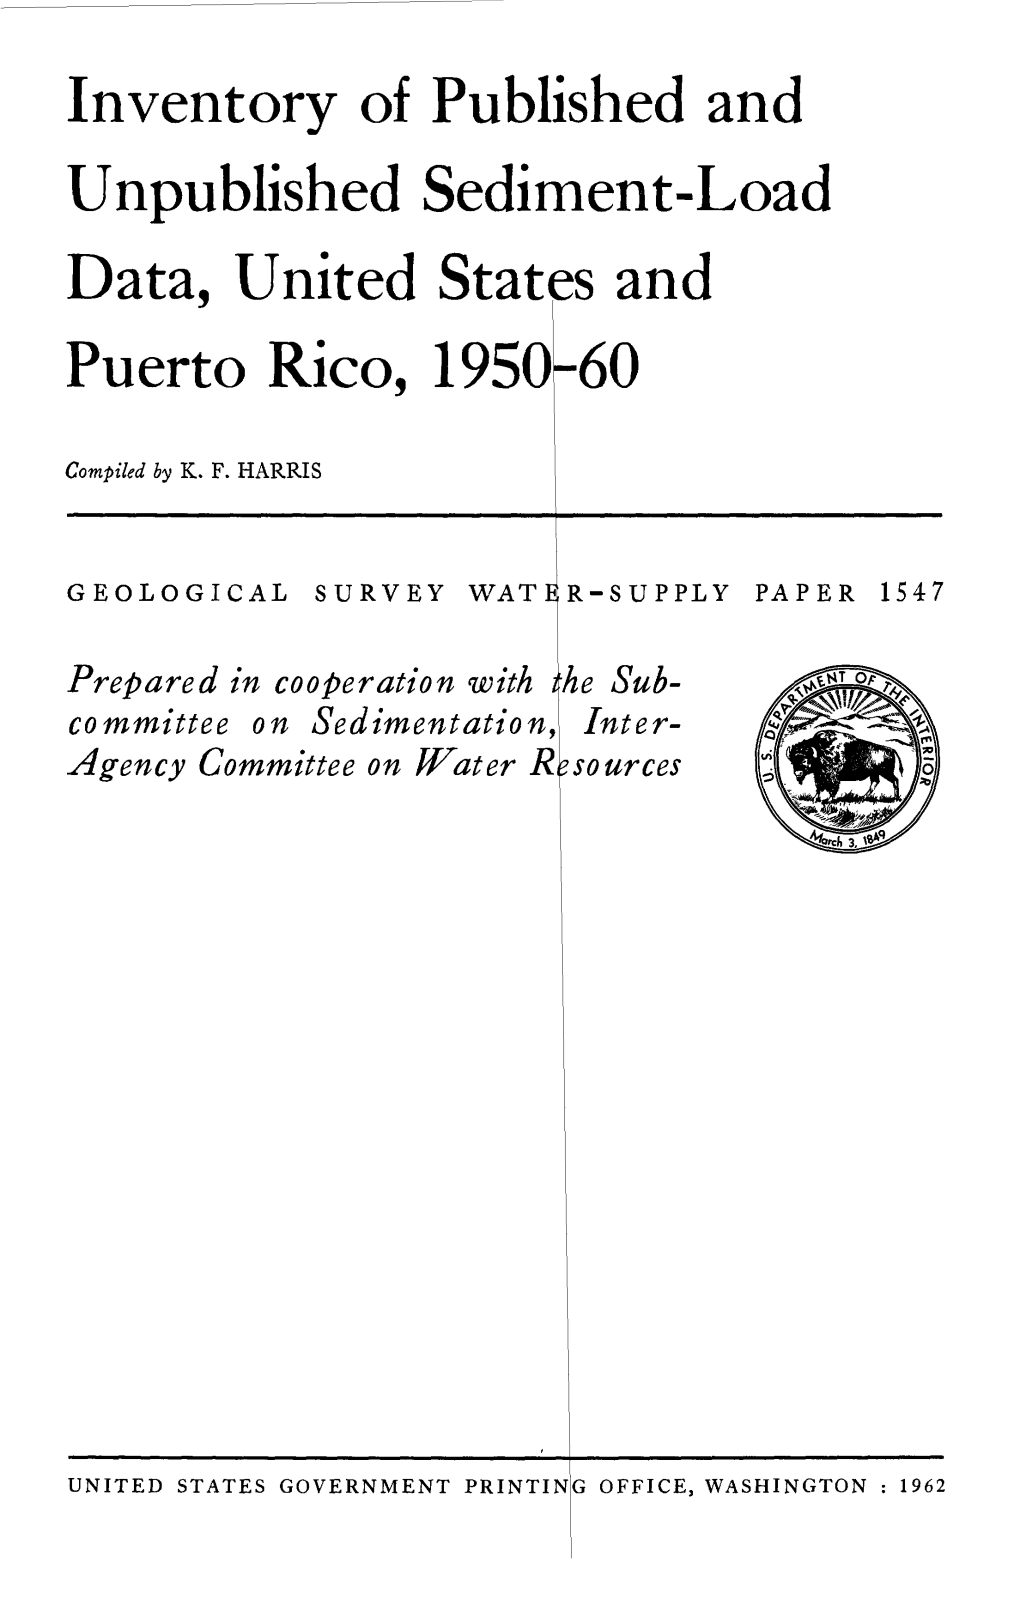 Inventory of Published and Unpublished Sediment-Load Data, United States and Puerto Rico, 1950 60